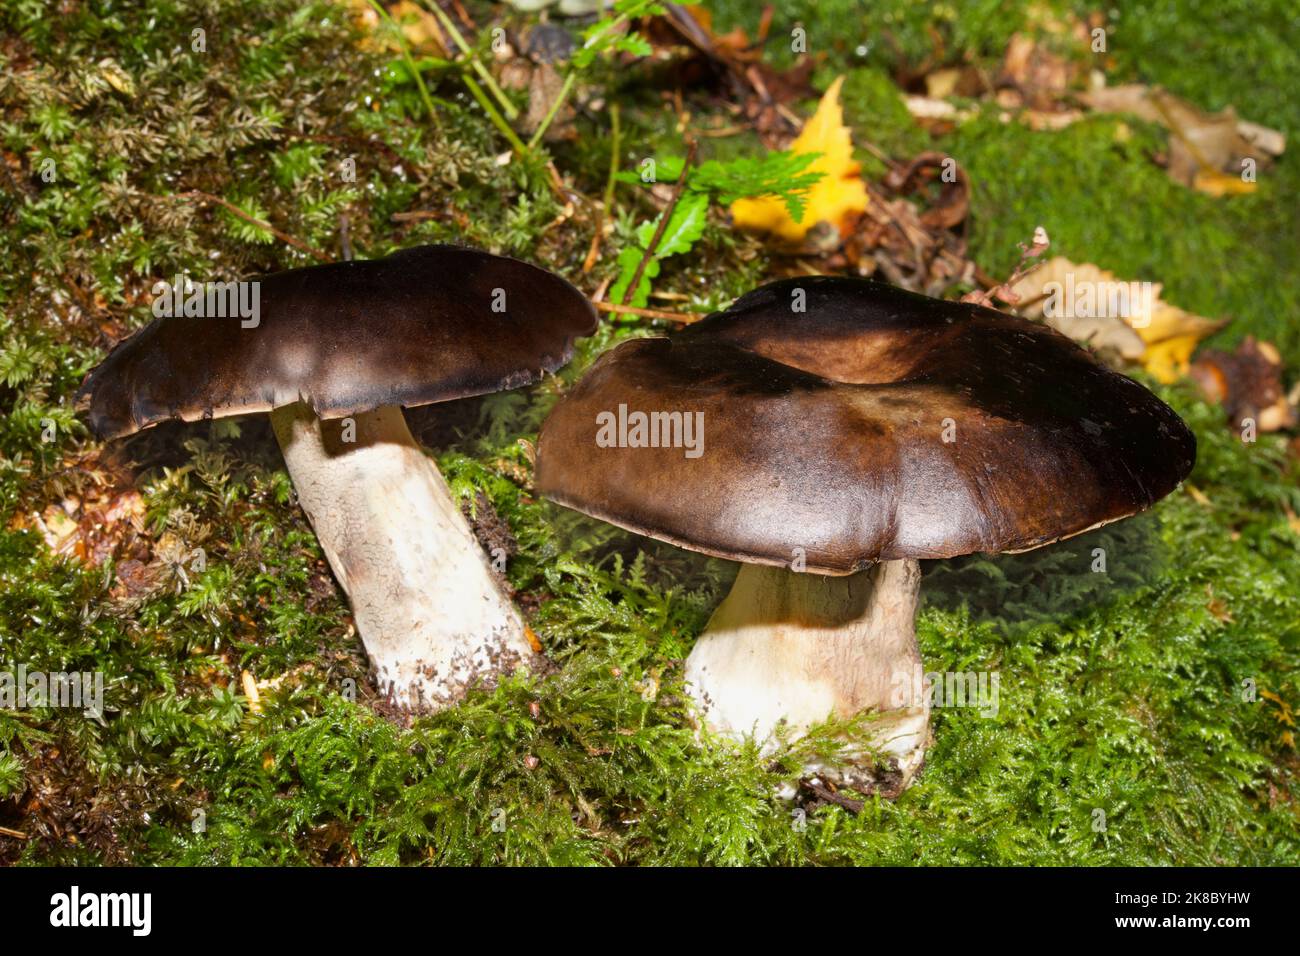 Russula nigricans, commonly known as the blackening brittlegill or blackening russula, is common in both deciduous and coniferous woodland. Stock Photo